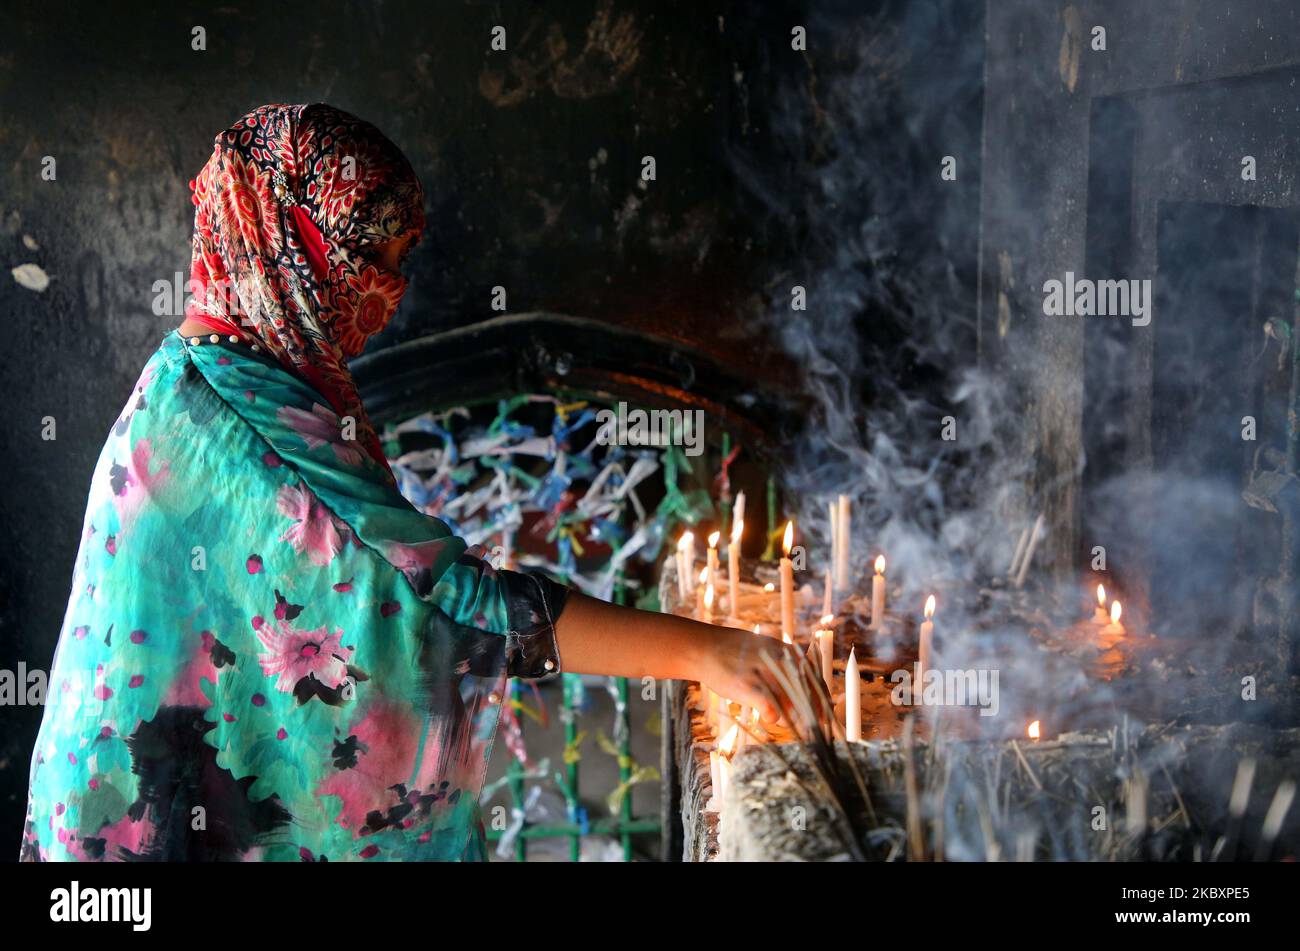 The tenth day of Muharram is celebrated as Ashura, Shia muslims celebrate the day as mourning day for recalling the martyrdom of Prophet Hazrat Muhammad's grandson Hazrat Imam Hussain, his relatives and 72 supporters during the clash of Karbala on this day in the Hijri year of 61, in Dhaka, Bangladesh, on August 29, 2020. To recognize the day, consistently, Shias bring out customary parade known as Tazia in various regions of Bangladesh, including capital Dhaka. The people group plans for the parade and starts their recognition customs a couple of days before the tenth Muharram. But this year  Stock Photo